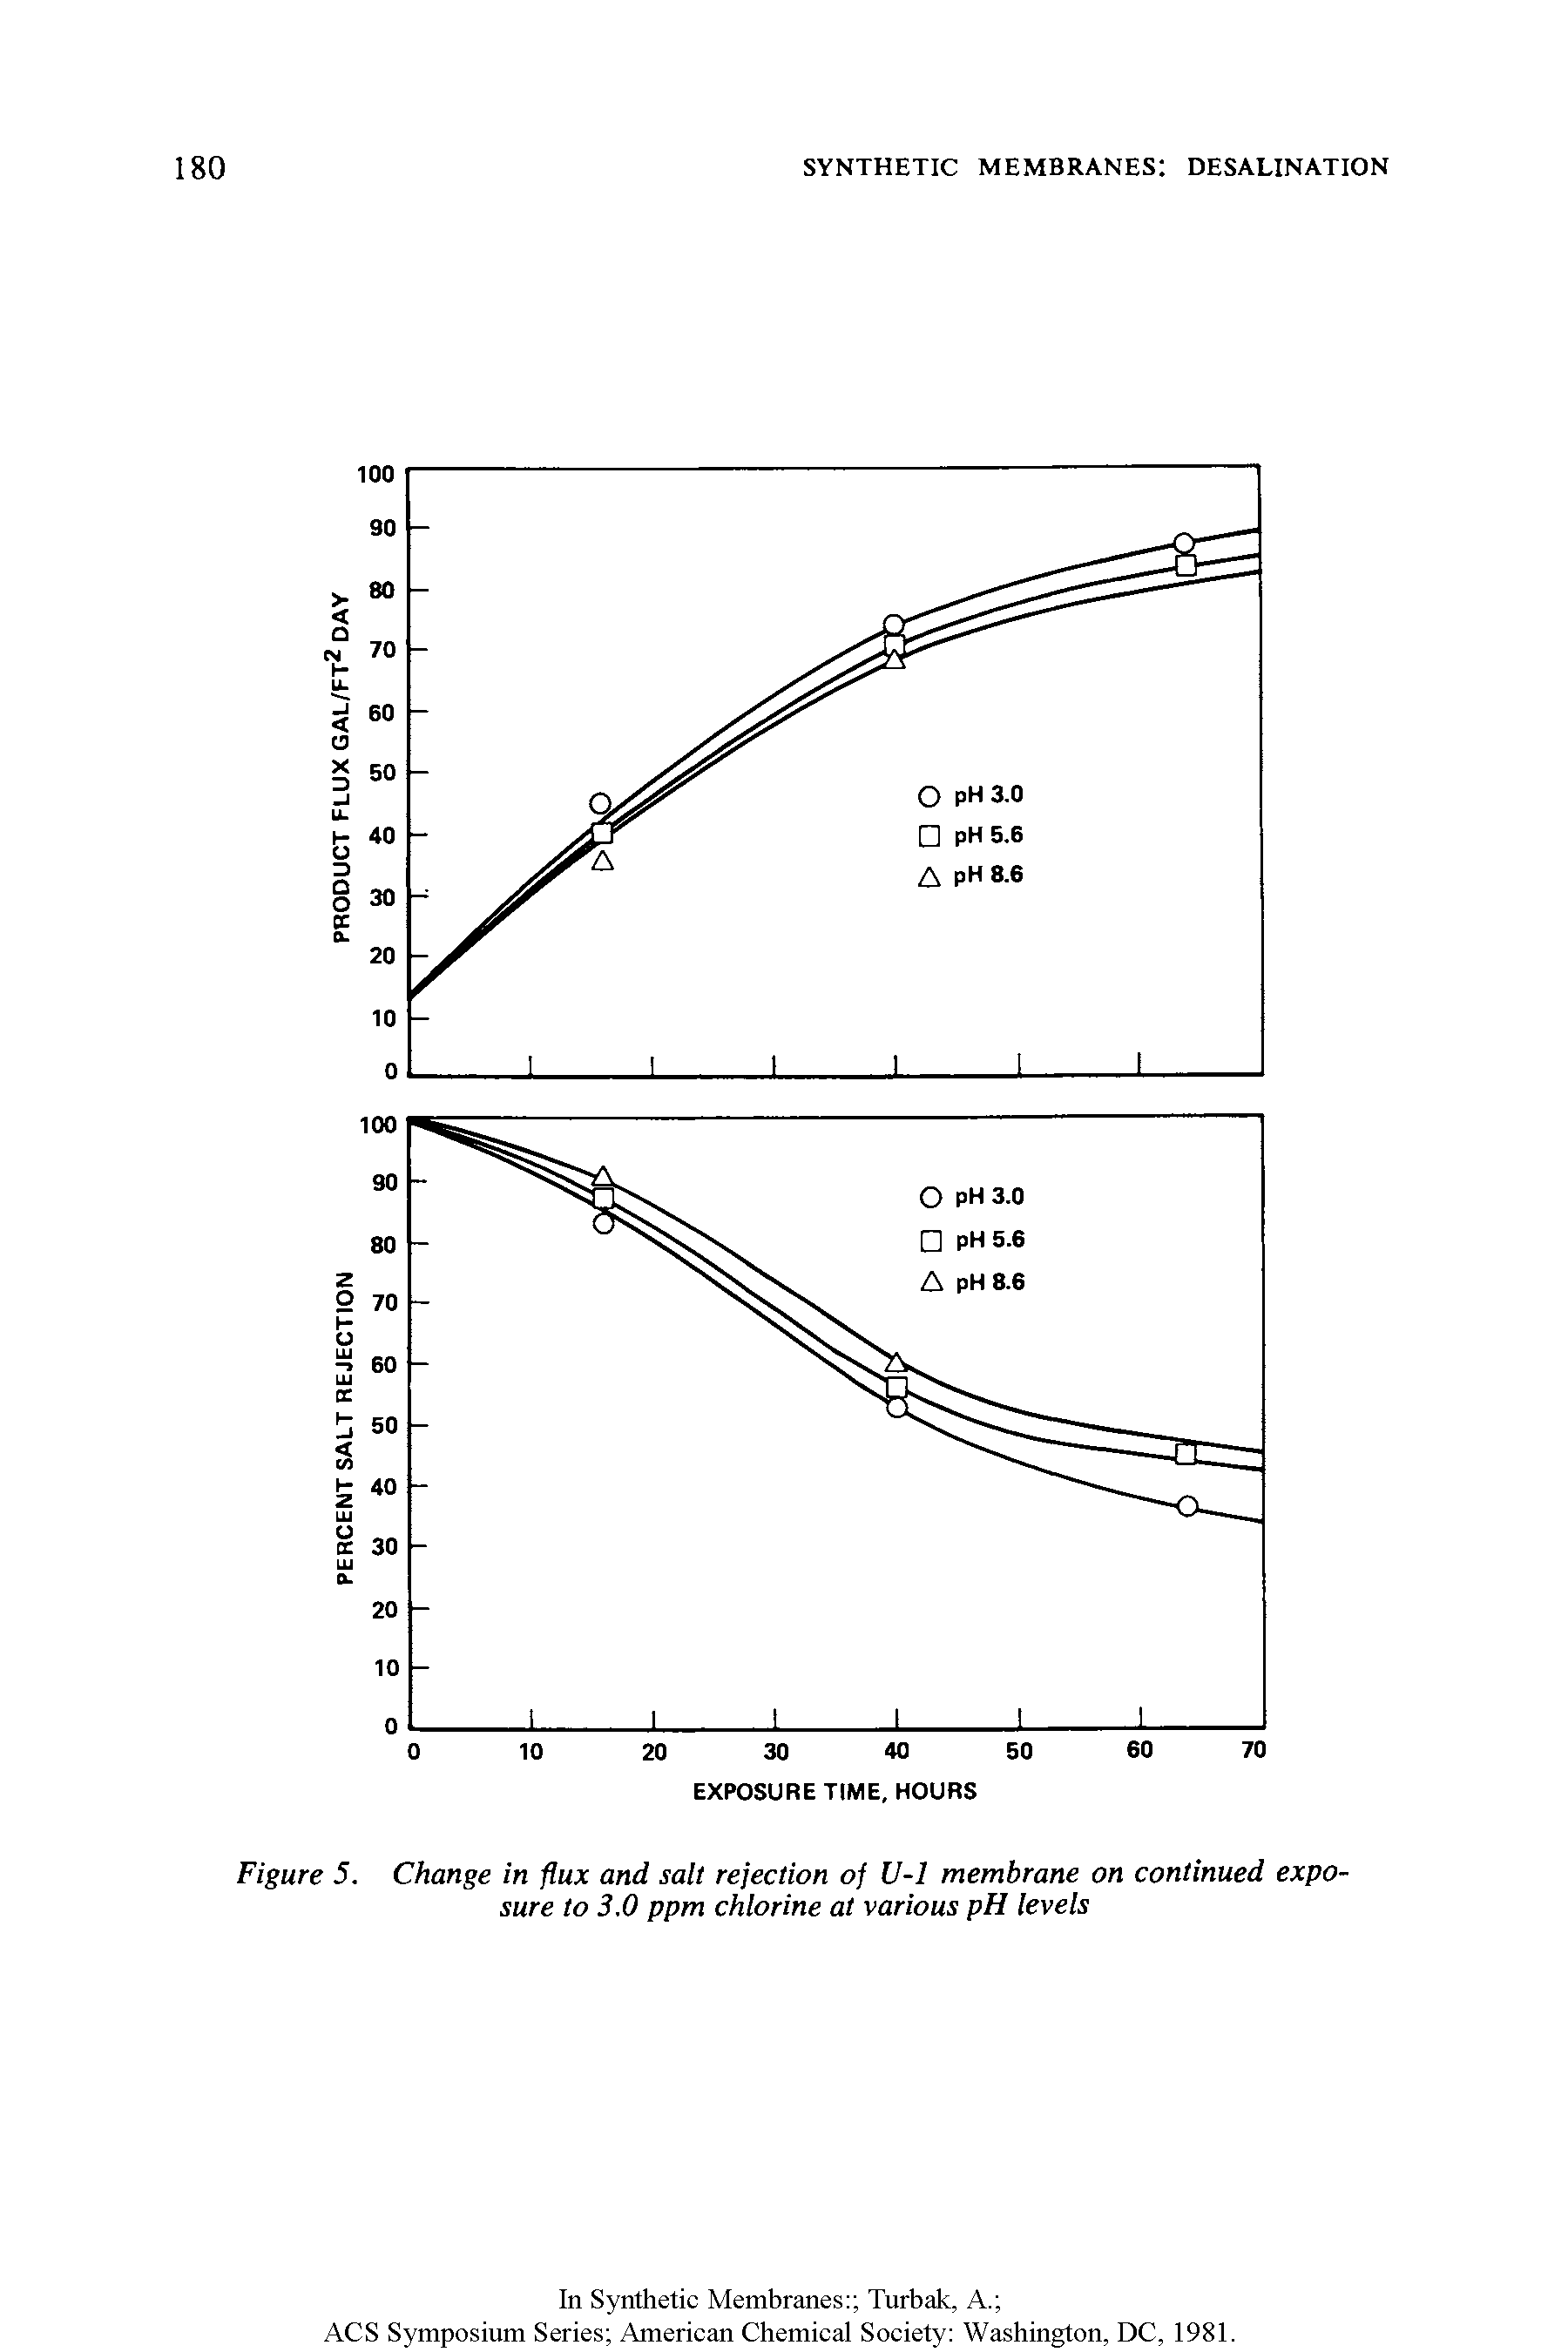 Figure 5. Change in flux and salt rejection of U-1 membrane on continued exposure to 3,0 ppm chlorine at various pH levels...